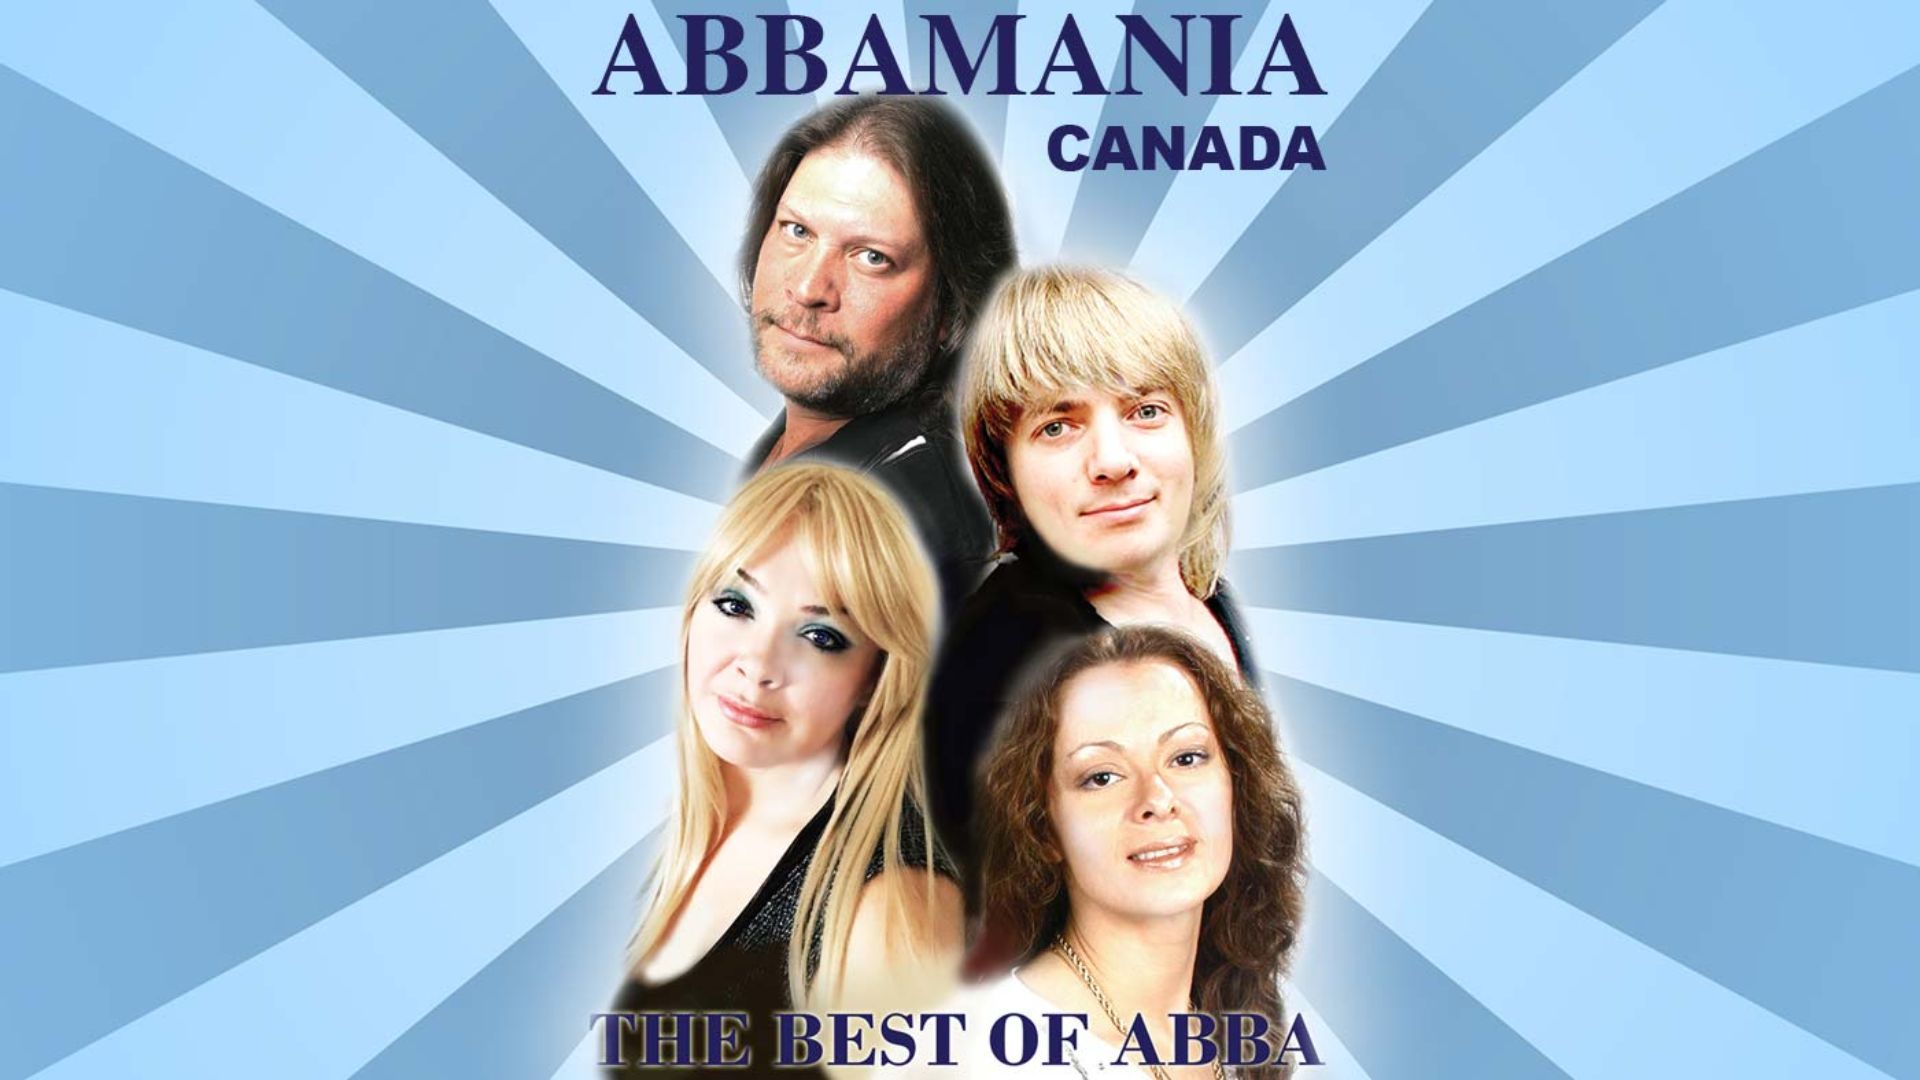 Abbamania – One Nite of ABBA – NOUVELLES DATES